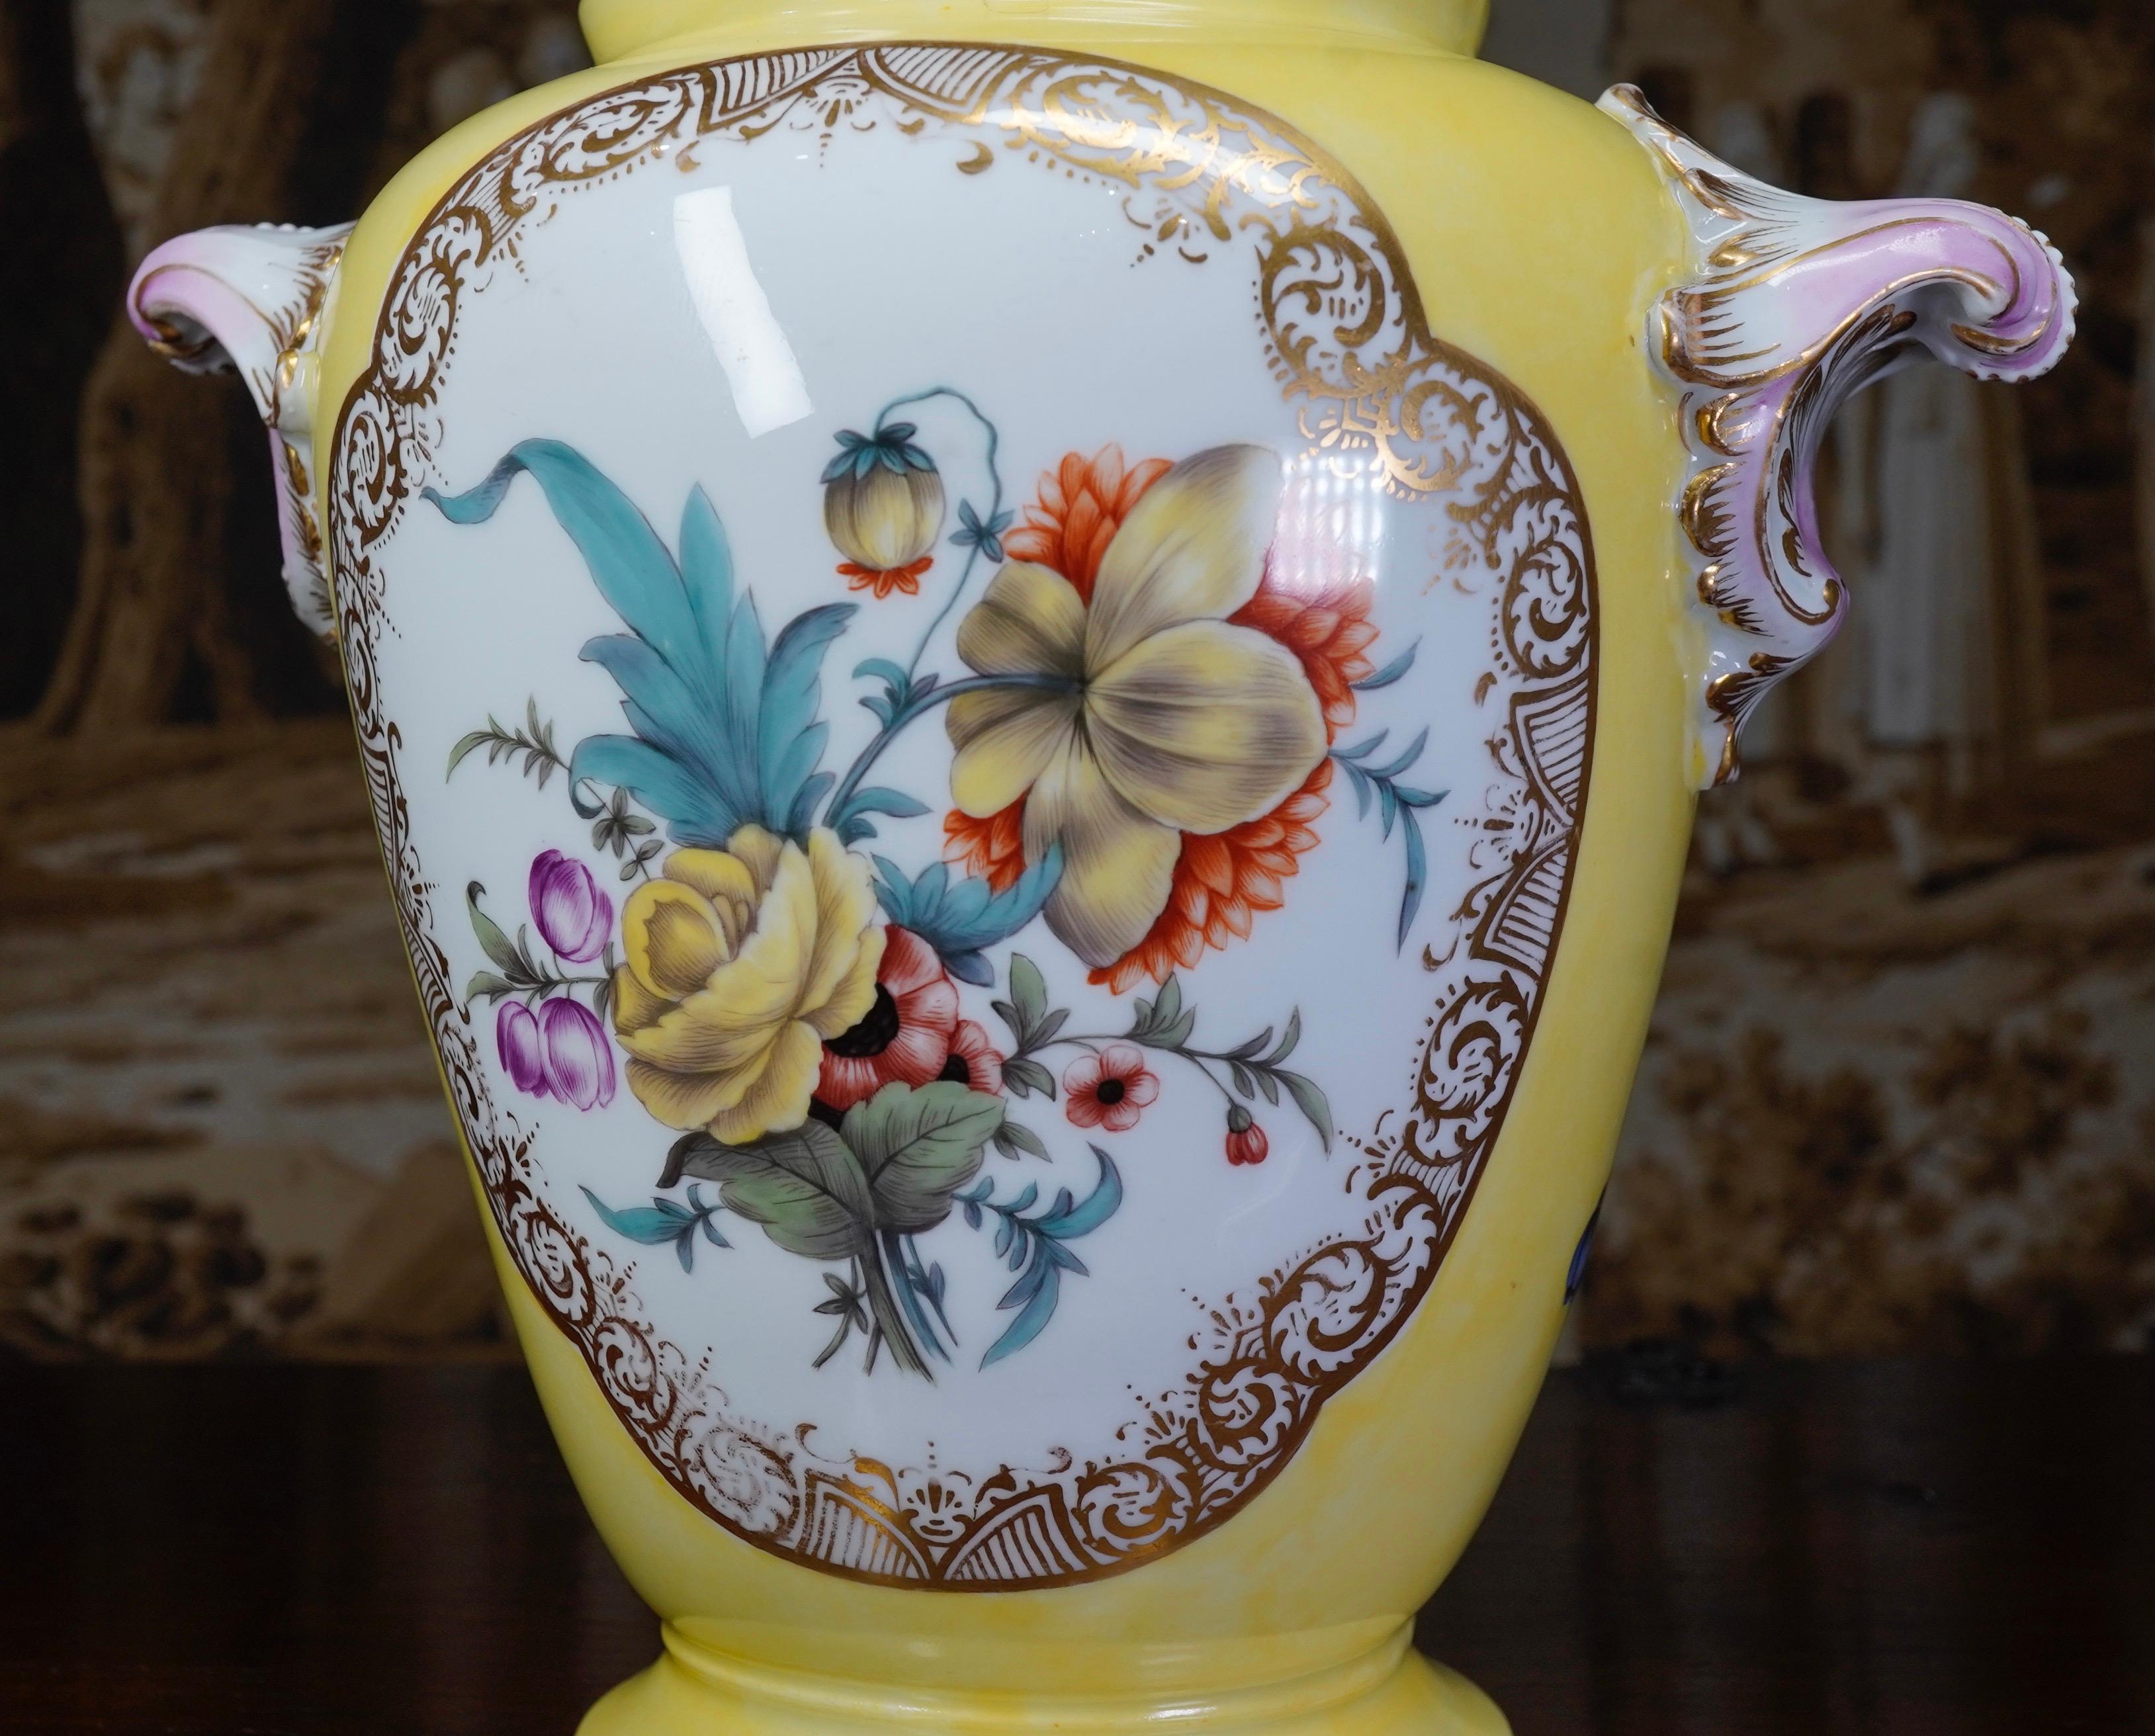 Rococo Furstenberg Vase with Fine Figure Painting, circa 1780 For Sale